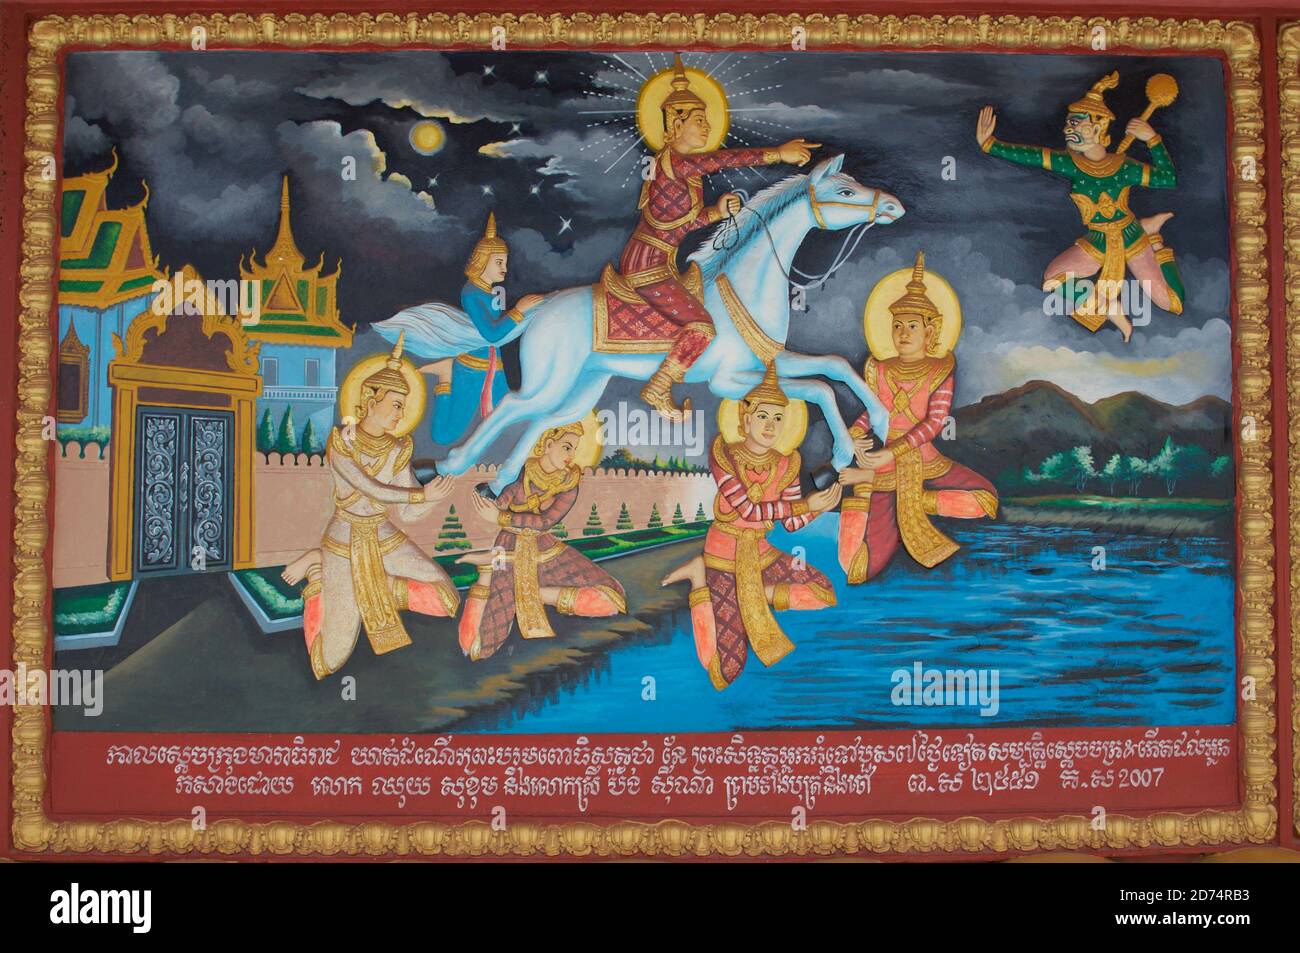 Siem Reap, Cambodia - 2nd January 2019 : Masterpiece art work painting about Buddha story on Wat Preah Prom Rath temple in Siem Reap city, Cambodia Stock Photo